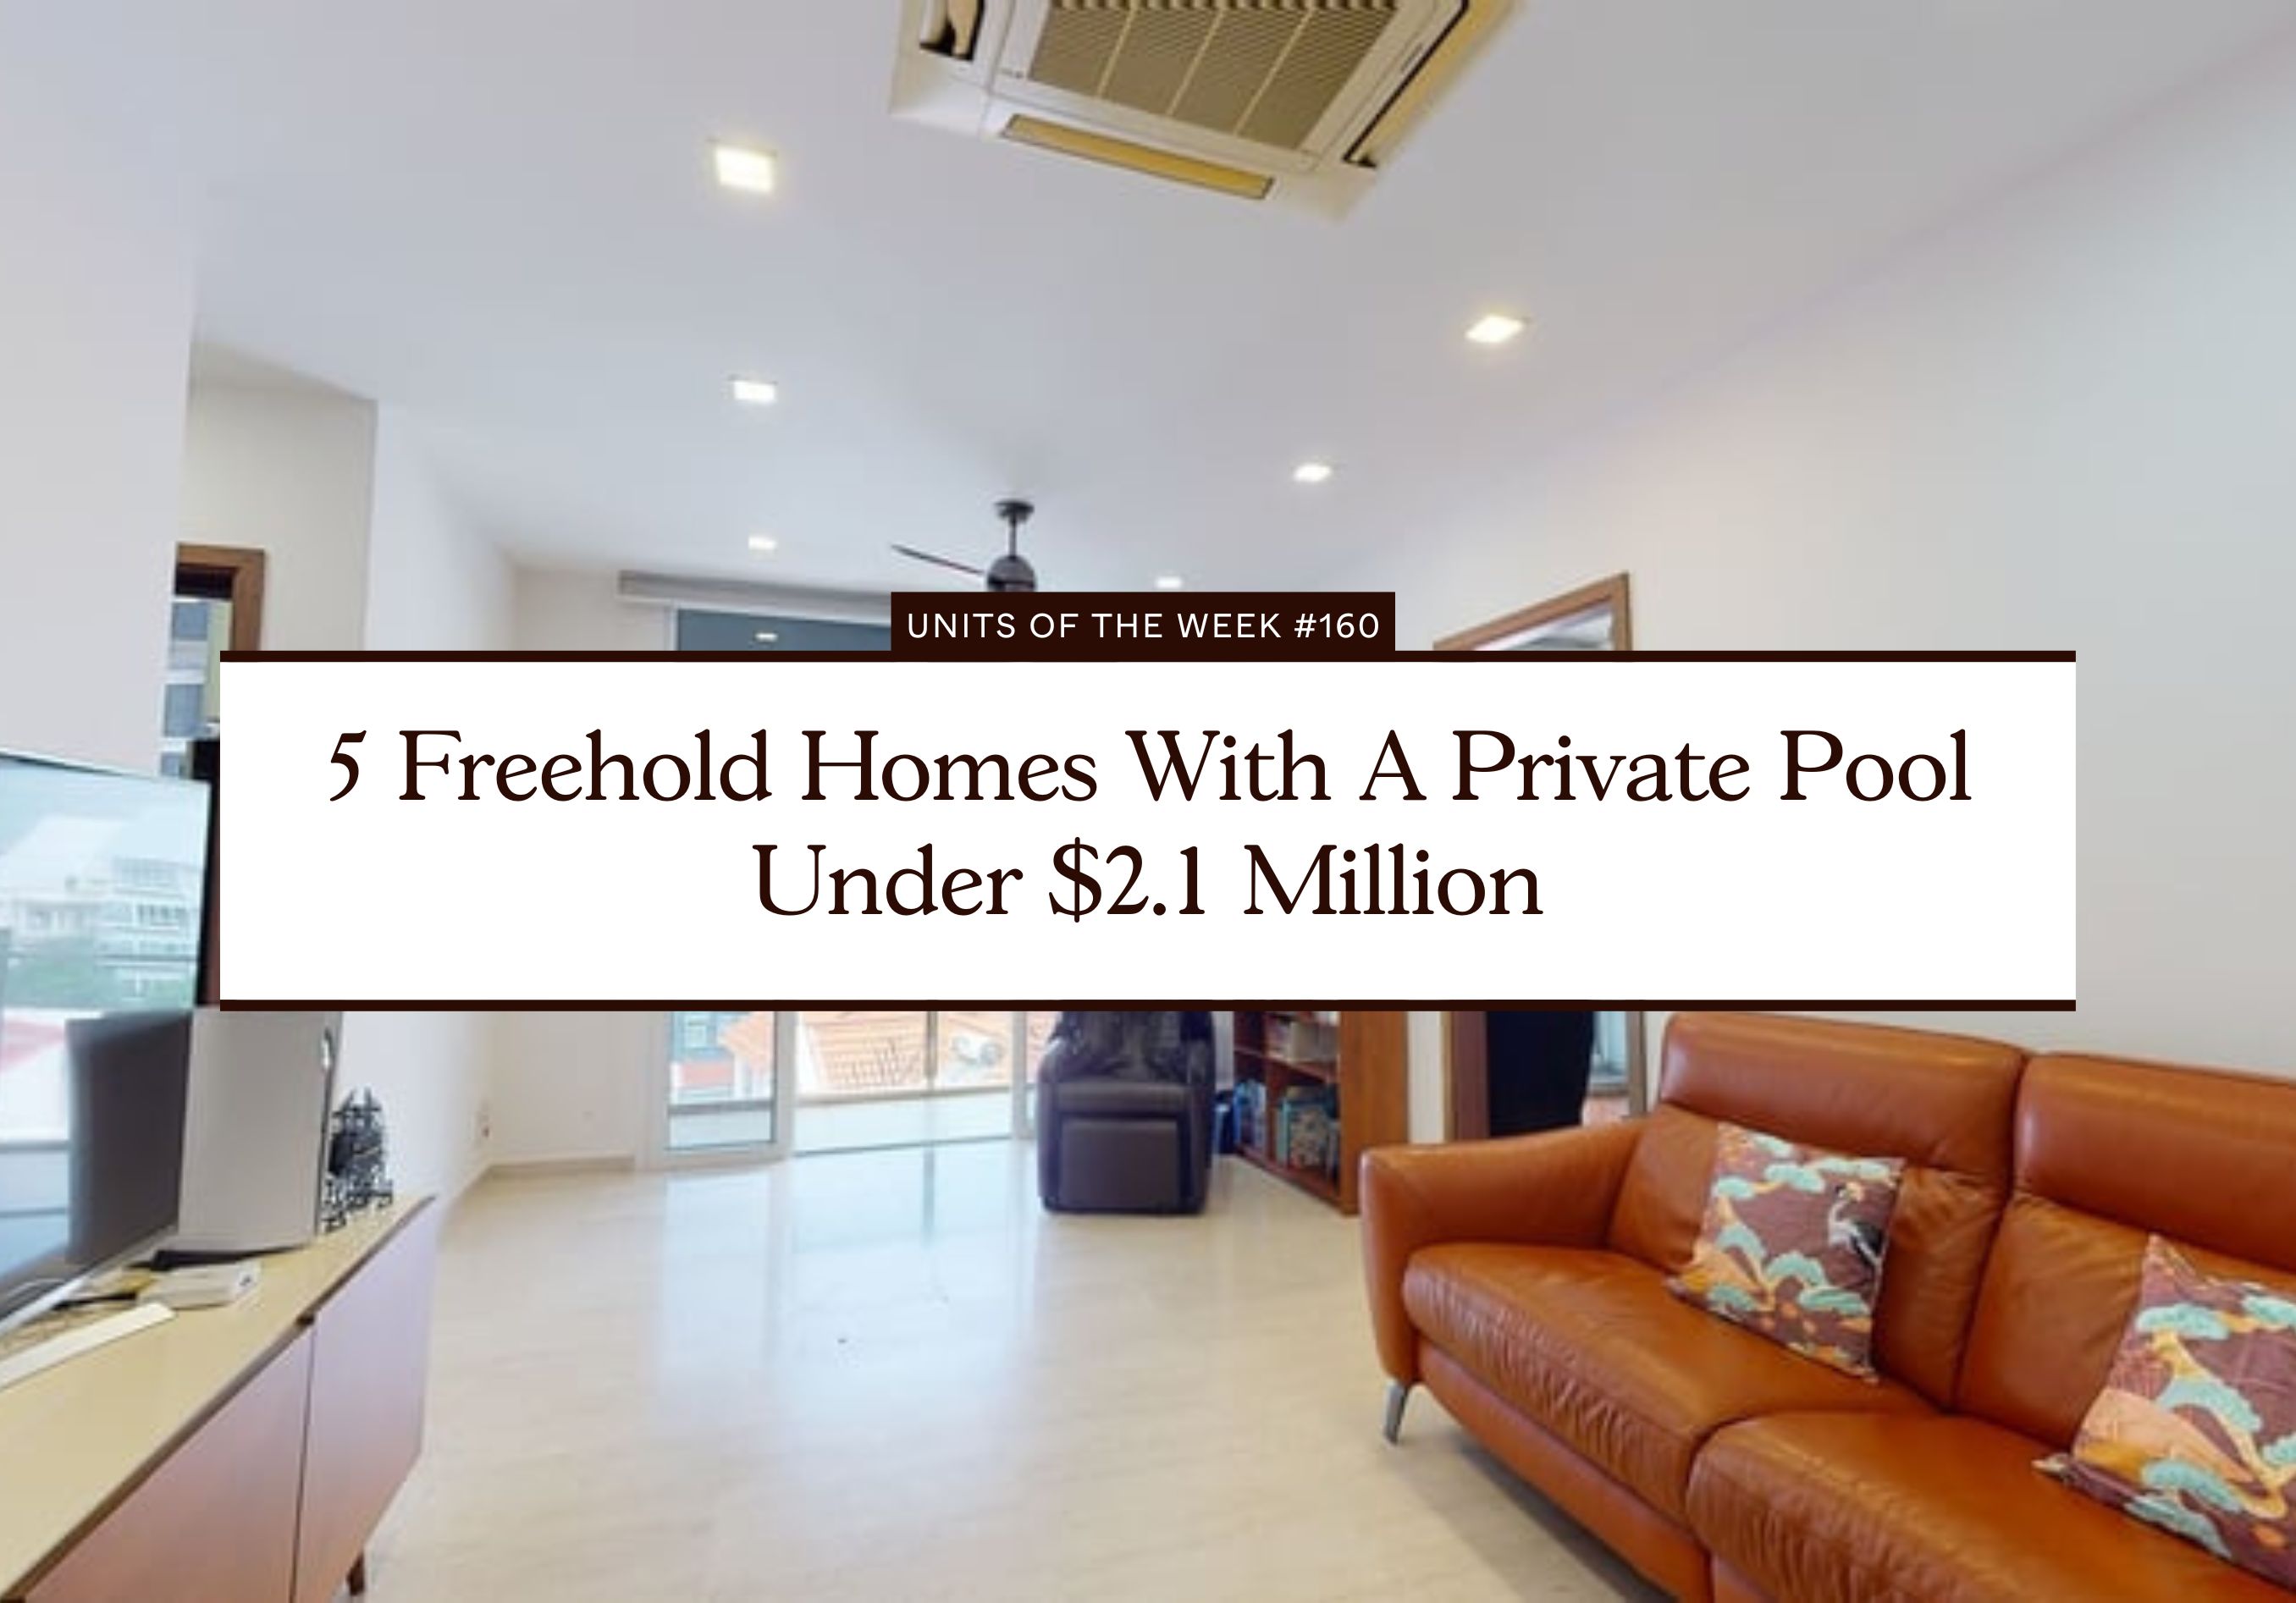 5 Freehold Homes With A Private Pool Under $2.1 Million